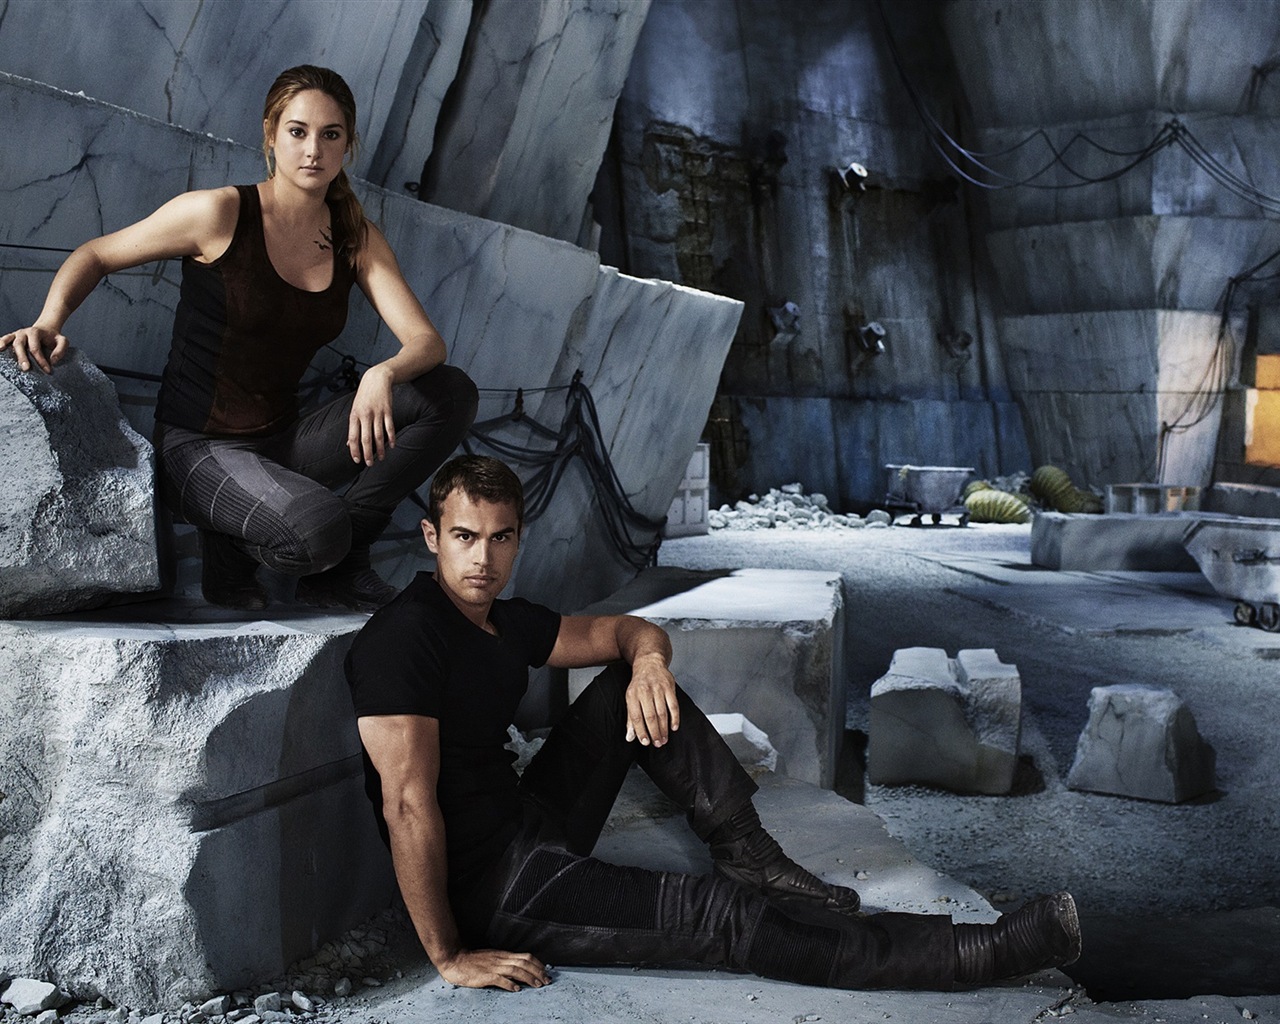 Divergent movie HD wallpapers #13 - 1280x1024